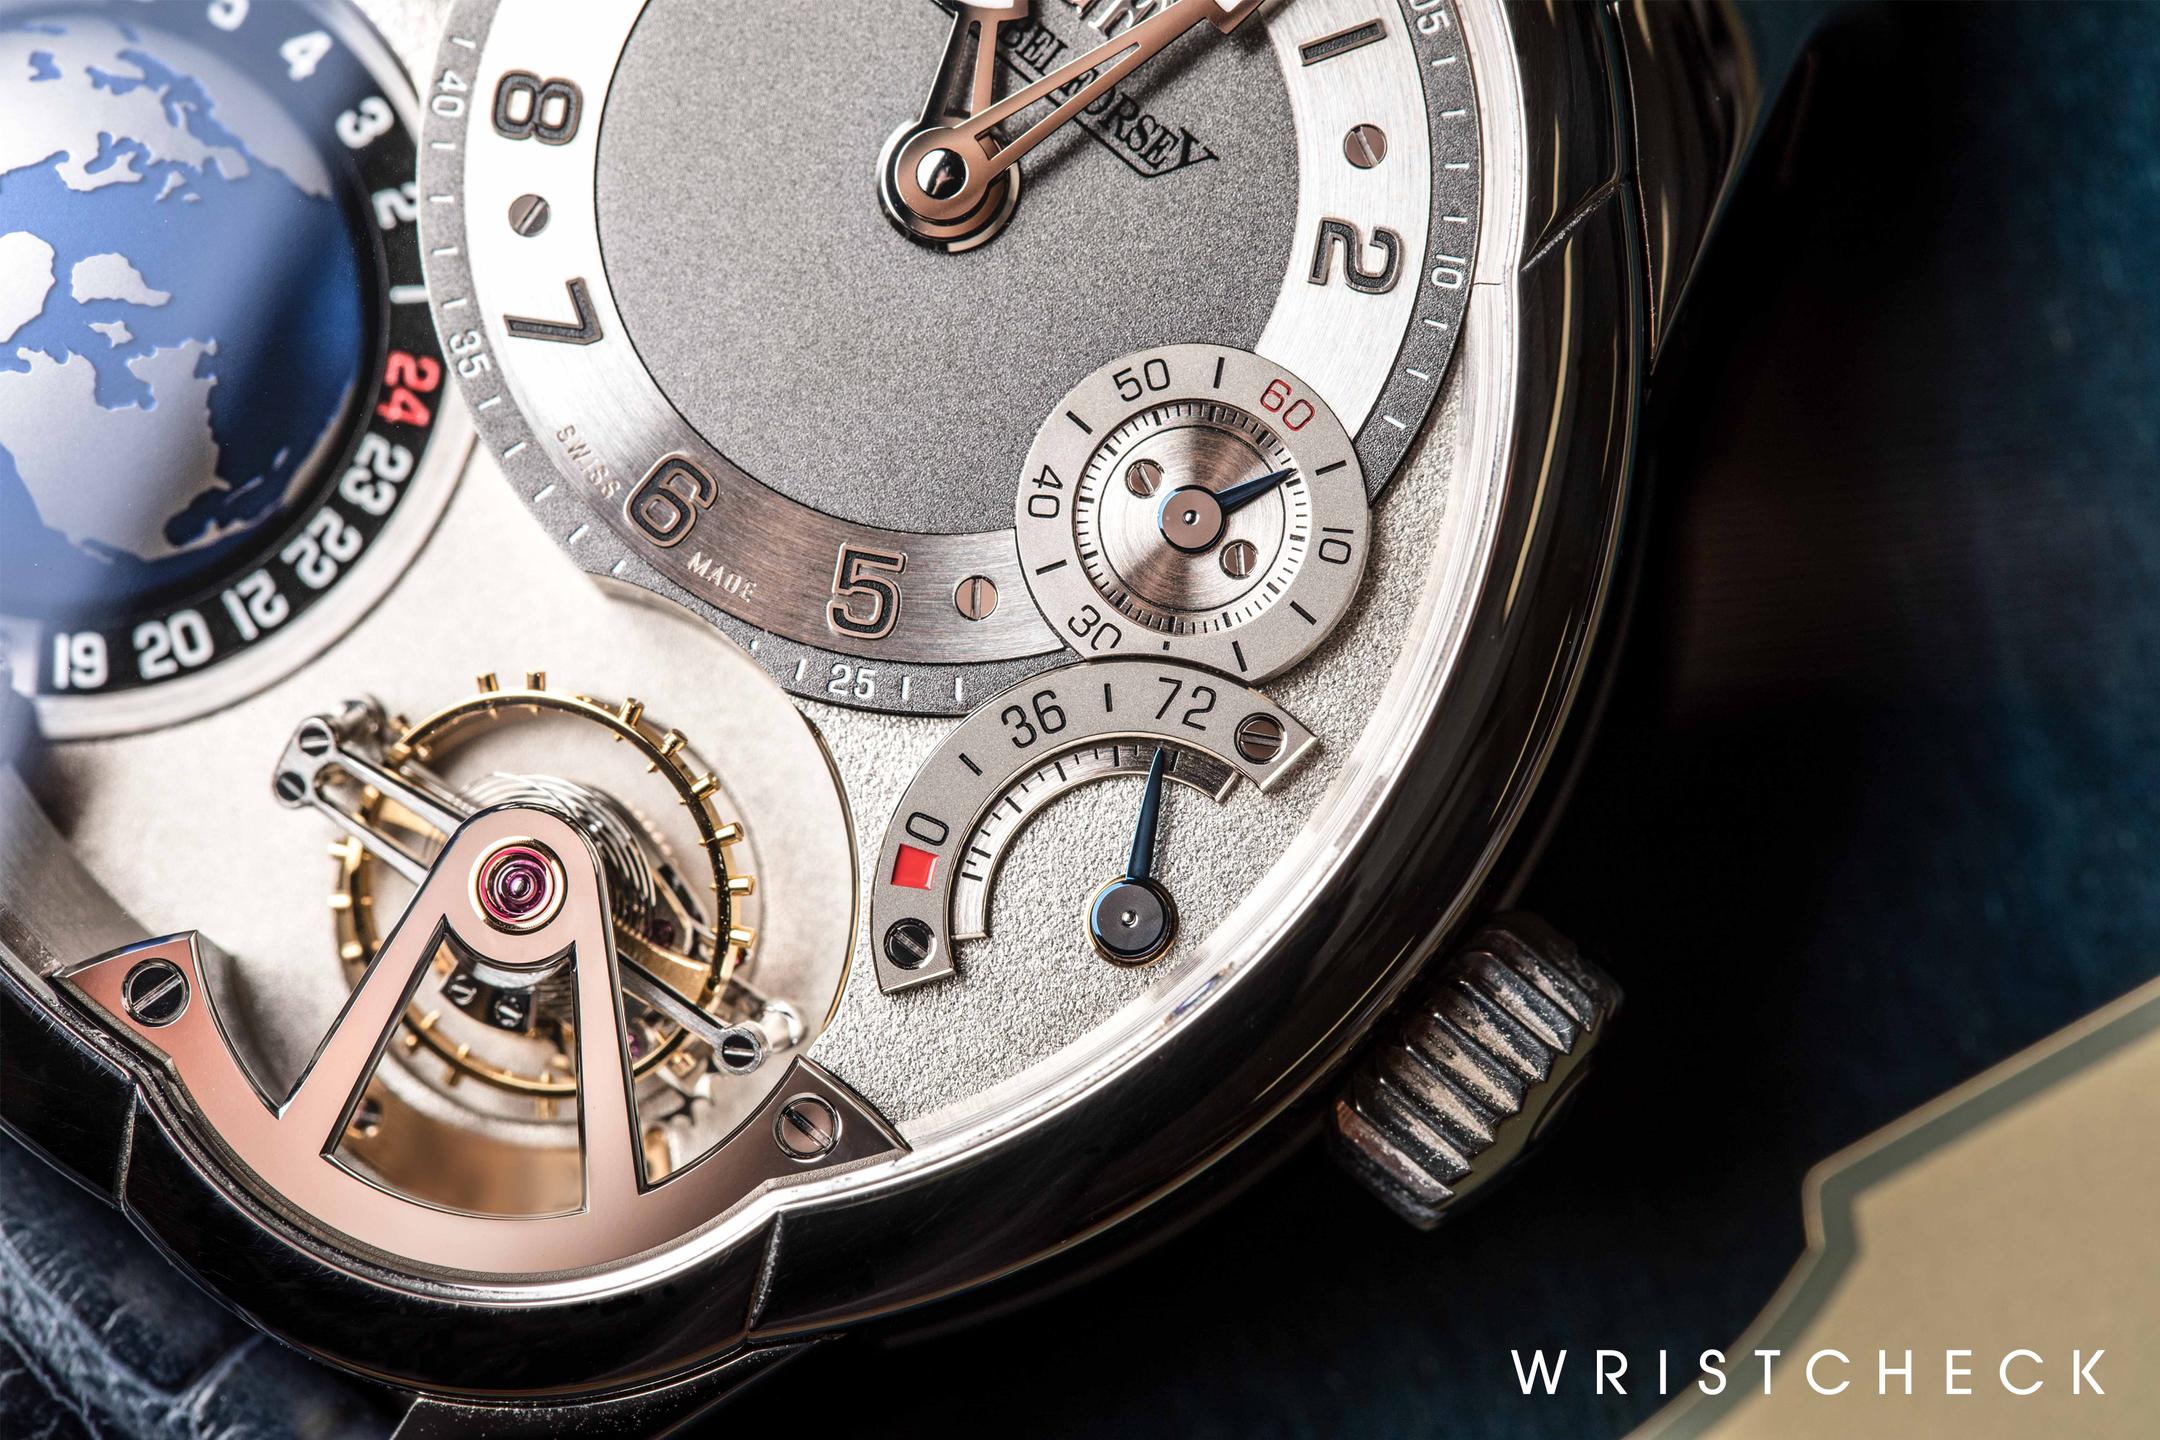 A 24-second inclined tourbillon at 4 o'clock position